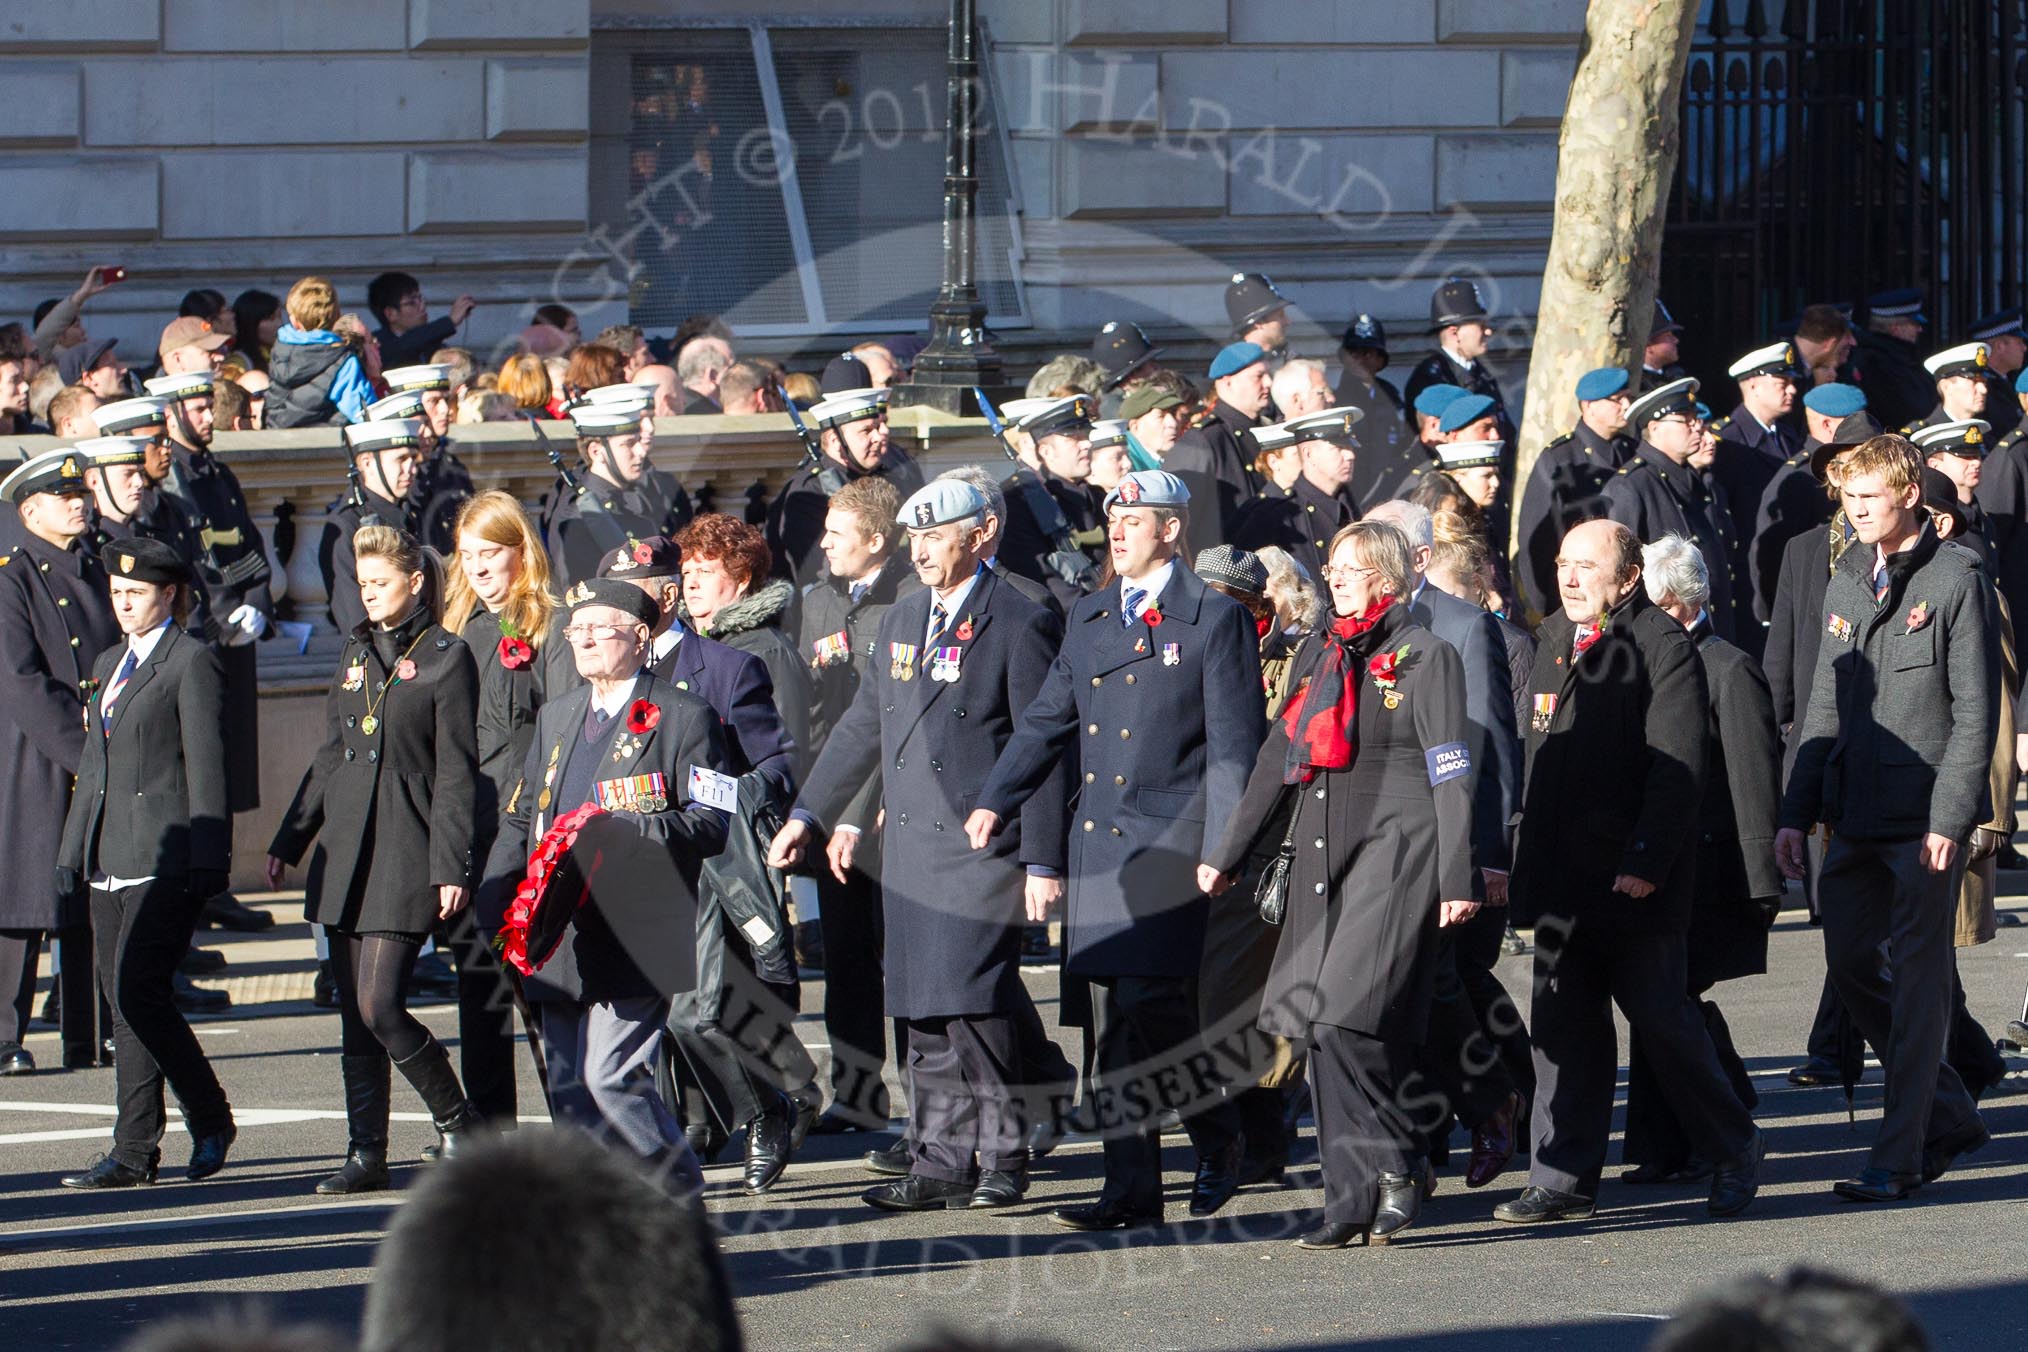 Remembrance Sunday 2012 Cenotaph March Past: Group F11 - Italy Star Association..
Whitehall, Cenotaph,
London SW1,

United Kingdom,
on 11 November 2012 at 11:46, image #463